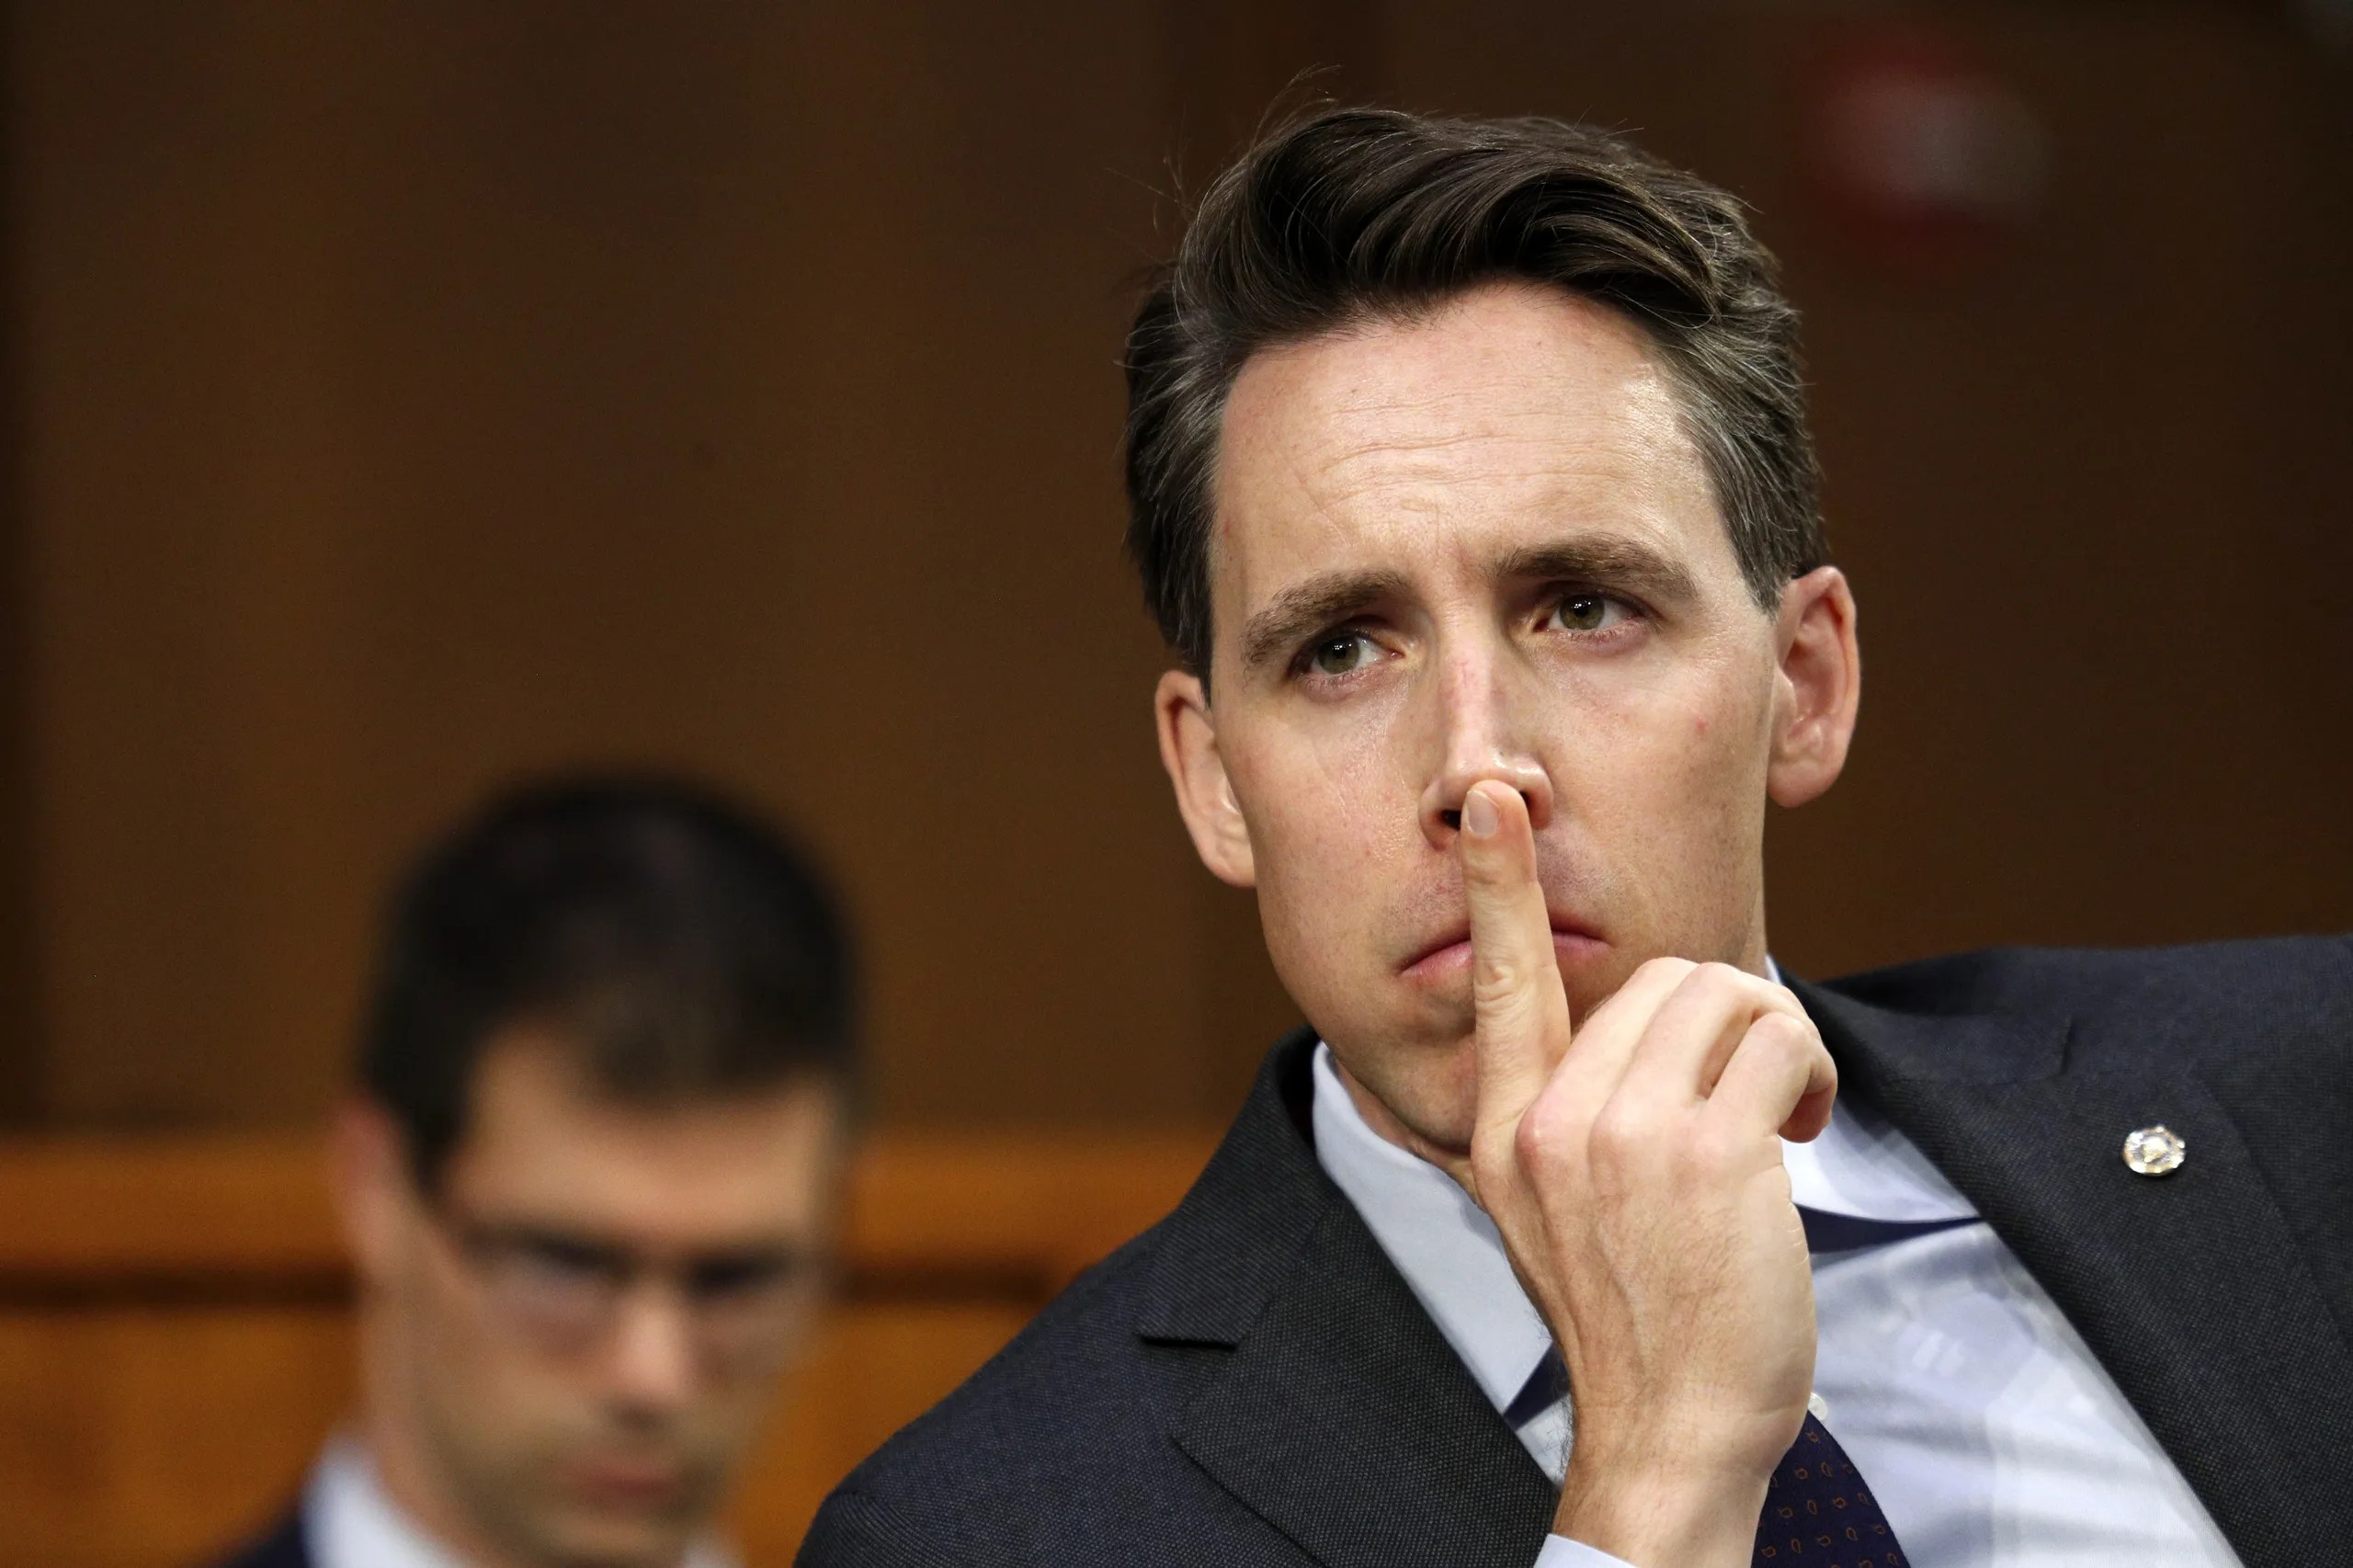 Josh Hawley Wants to Save America’s Troubled Young Men From the Evil